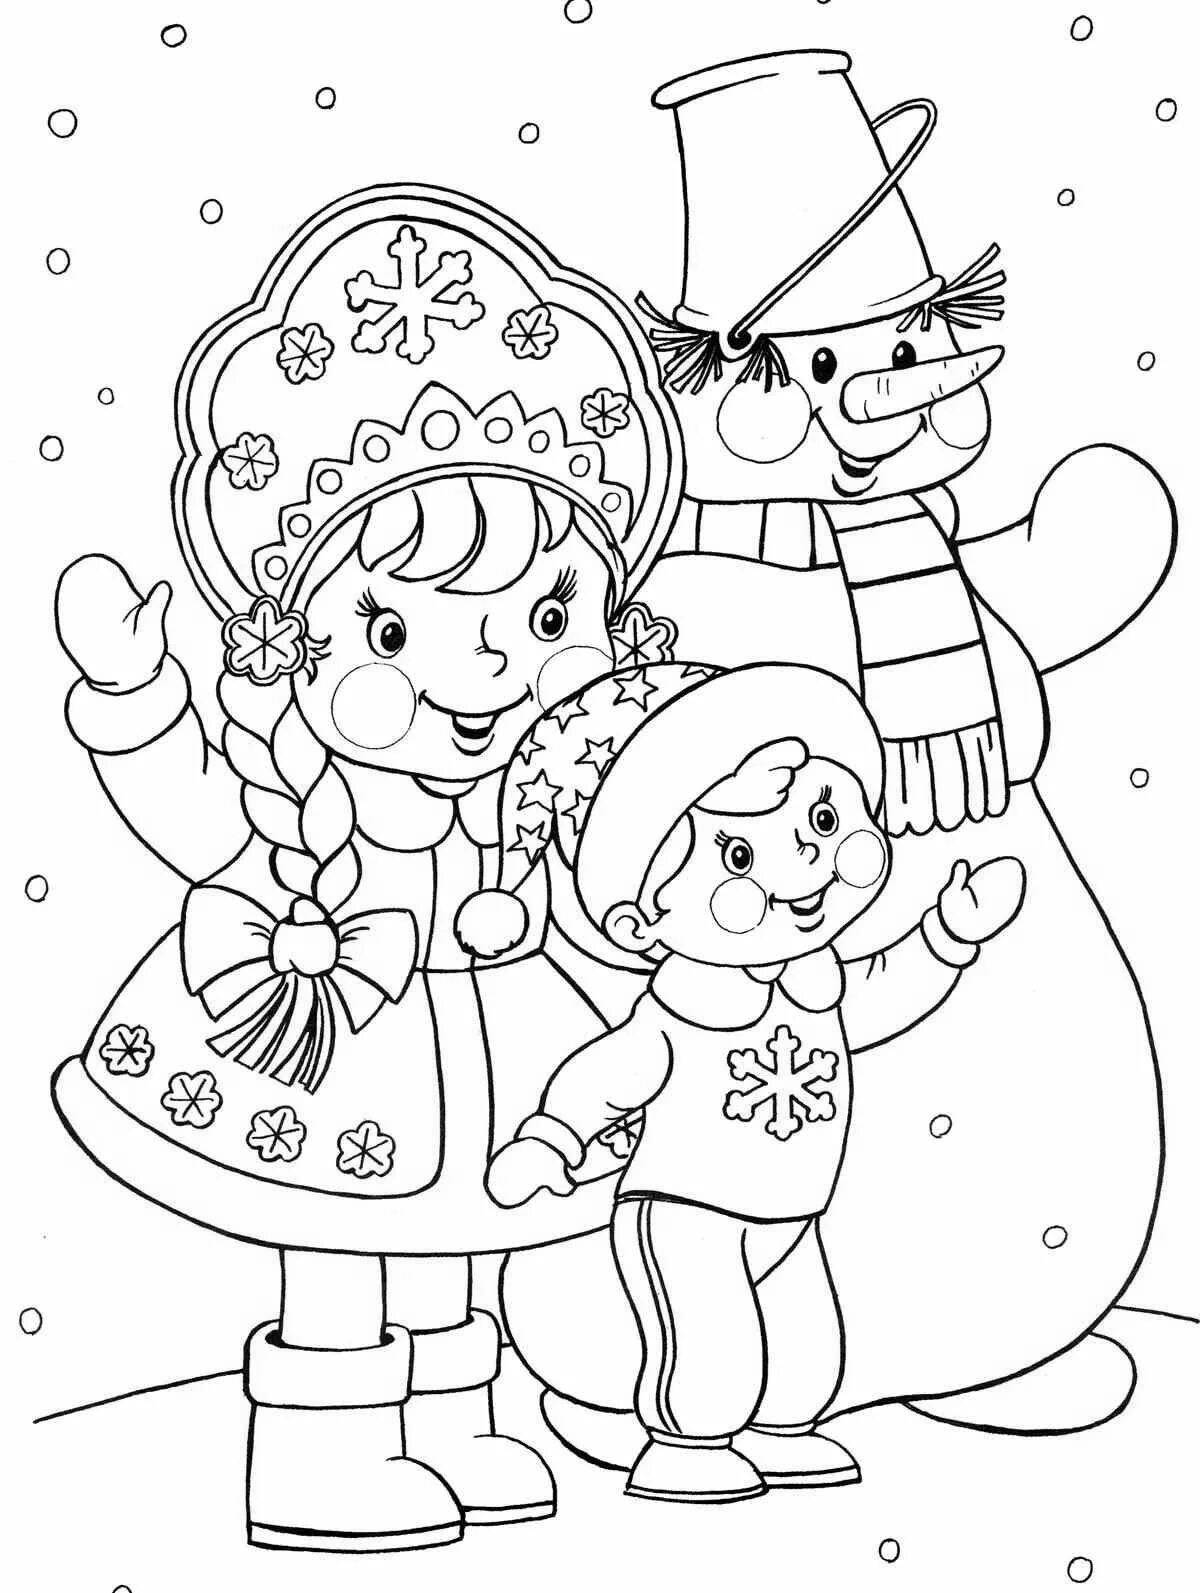 Merry Christmas coloring book for kids 5-6 years old